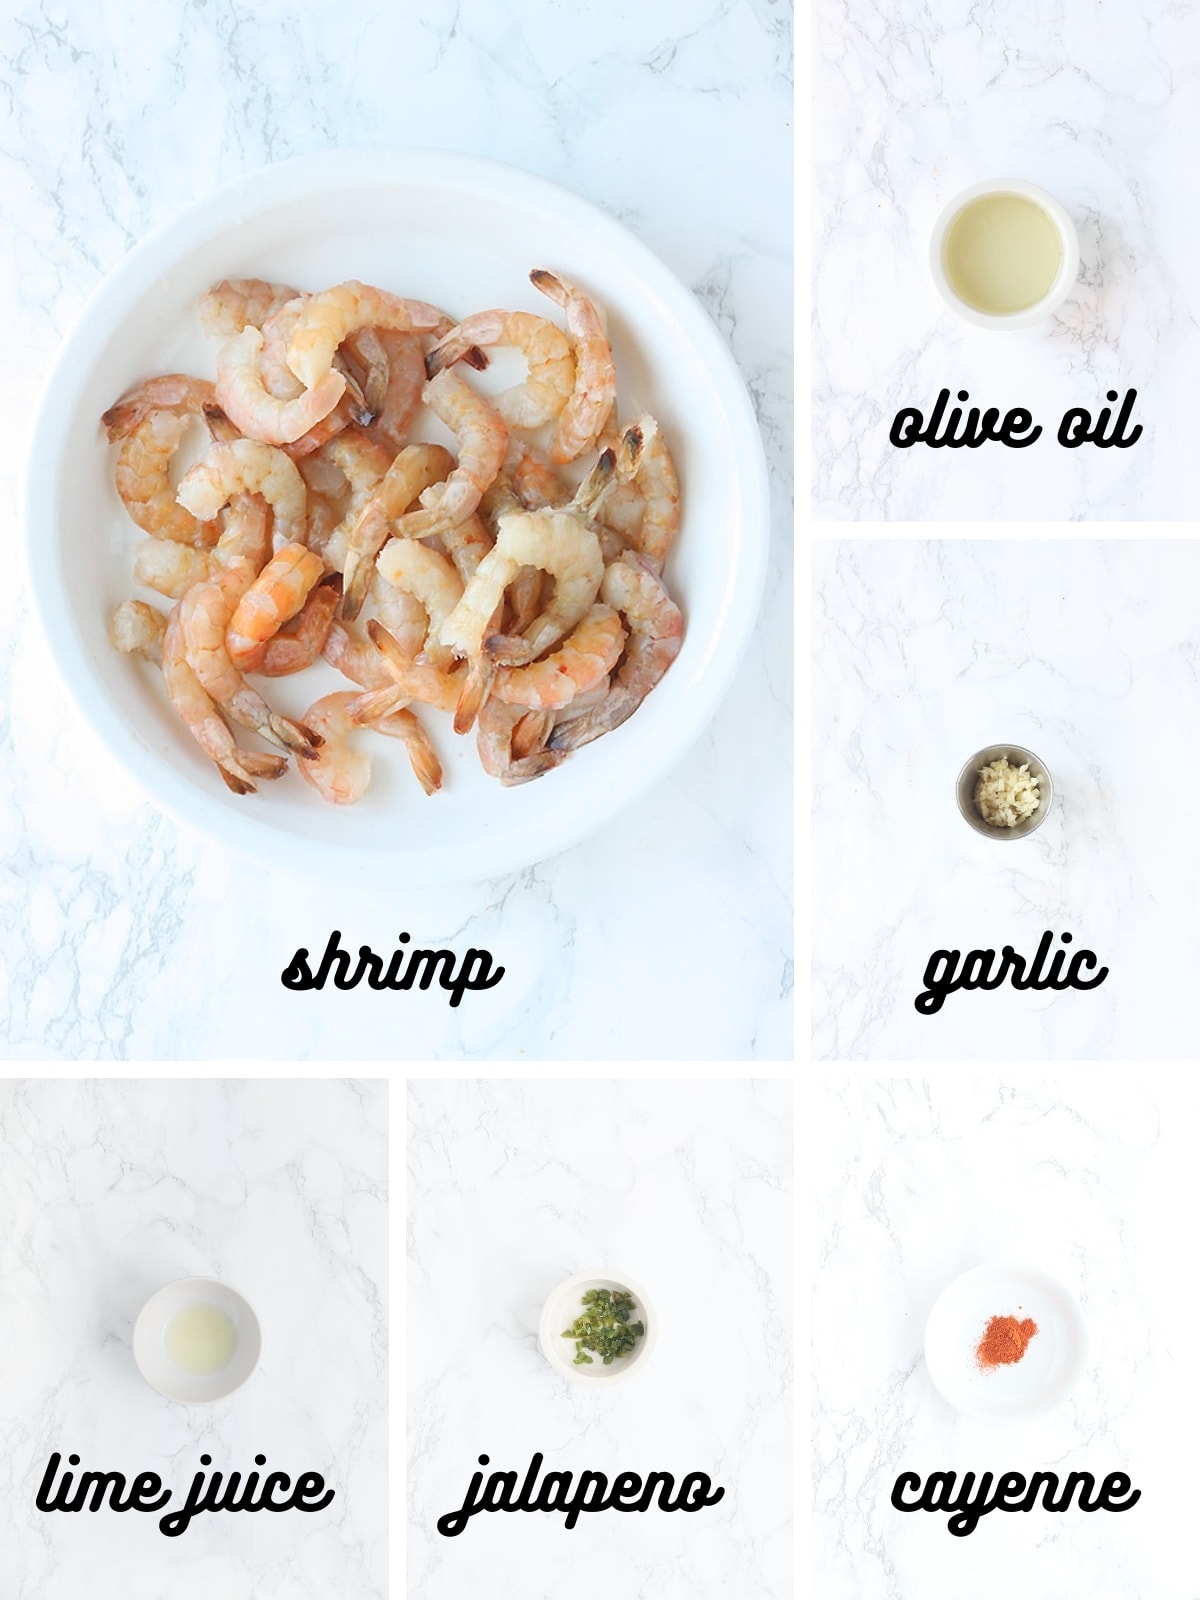 shrimp marinade ingredients include olive oil, minced garlic, lime juice, jalapeno pepper and cayenne pepper